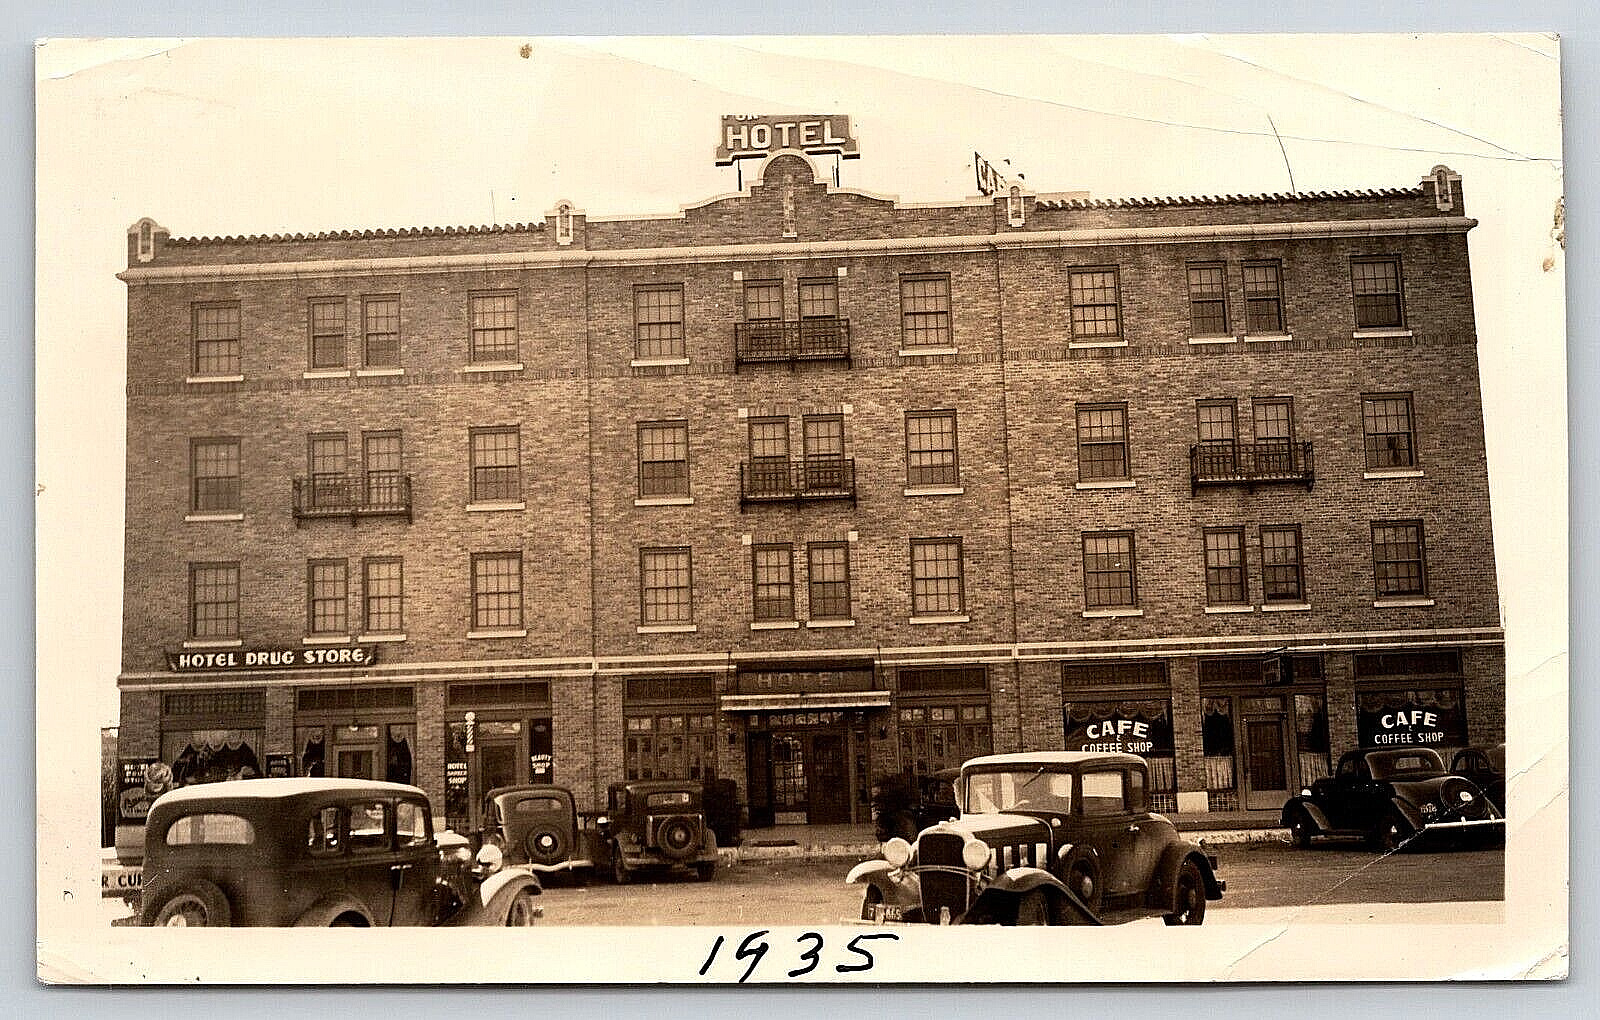 Vintage Photo Hotel Advertising Signs Cars Cafe Coffee Shop Drug Store Barber